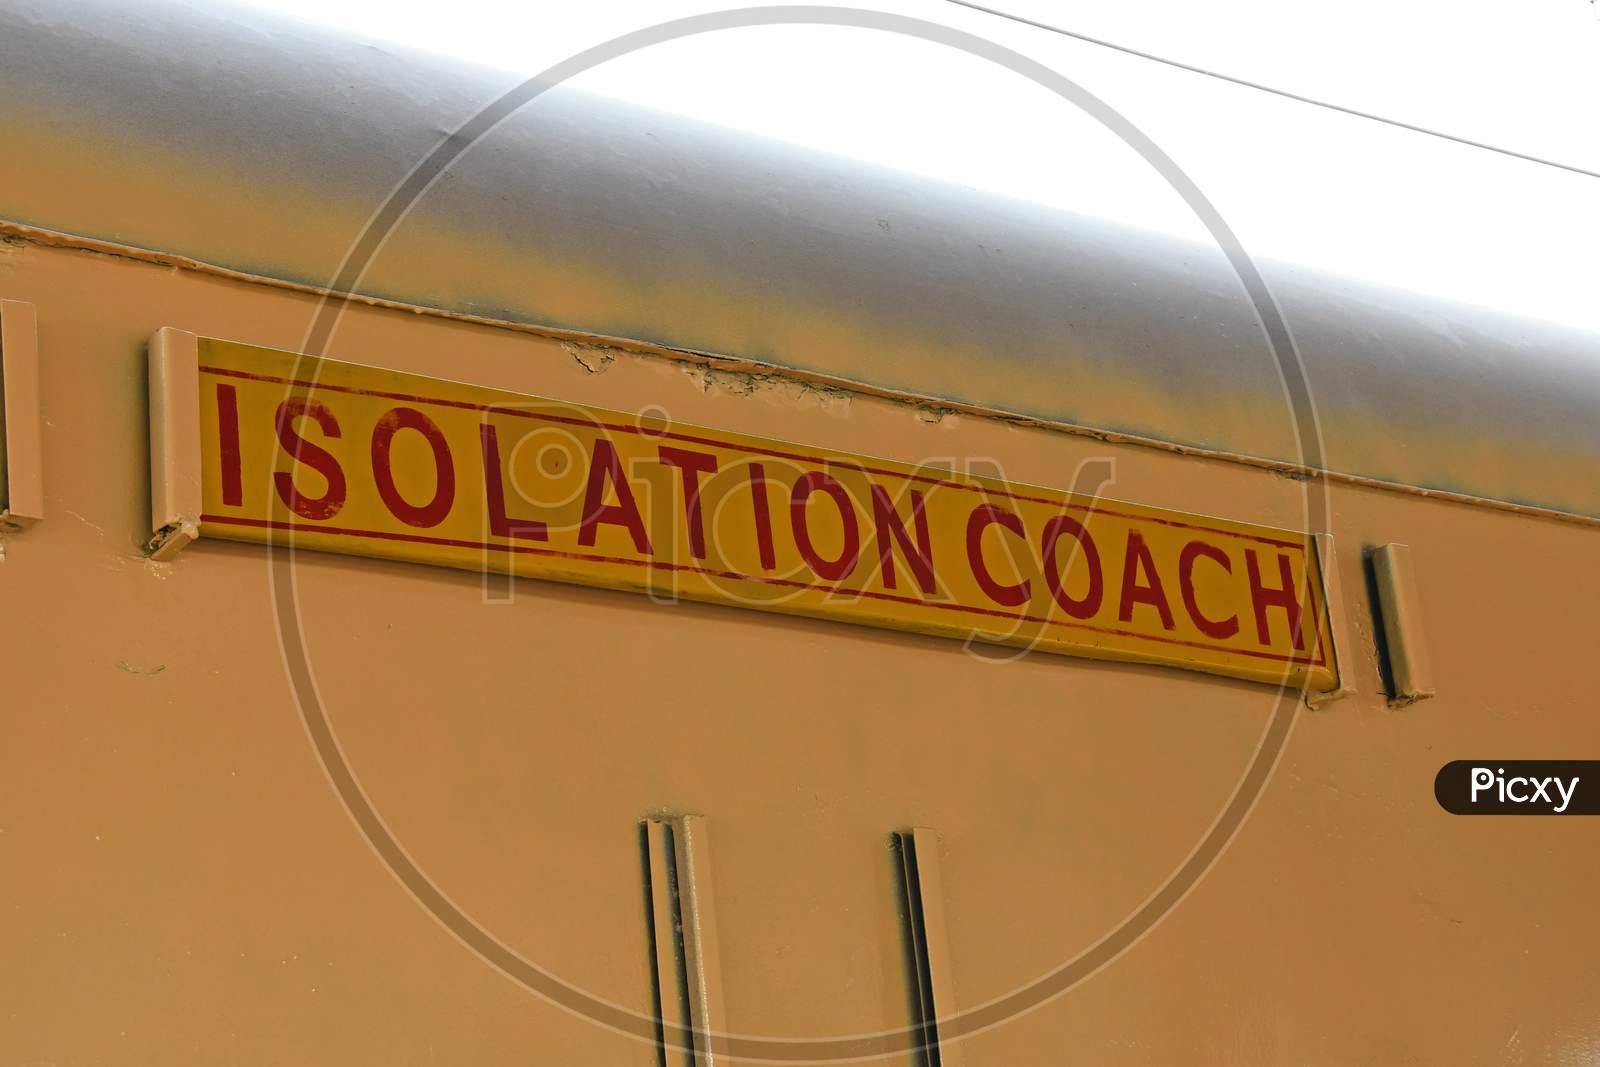 The Railway Department has converted a train coach into an Isolation Coach for patients with suspected Novel coronavirus Covid-19 disease. At Burdwan Junction Railway Station, West Bengal, India.